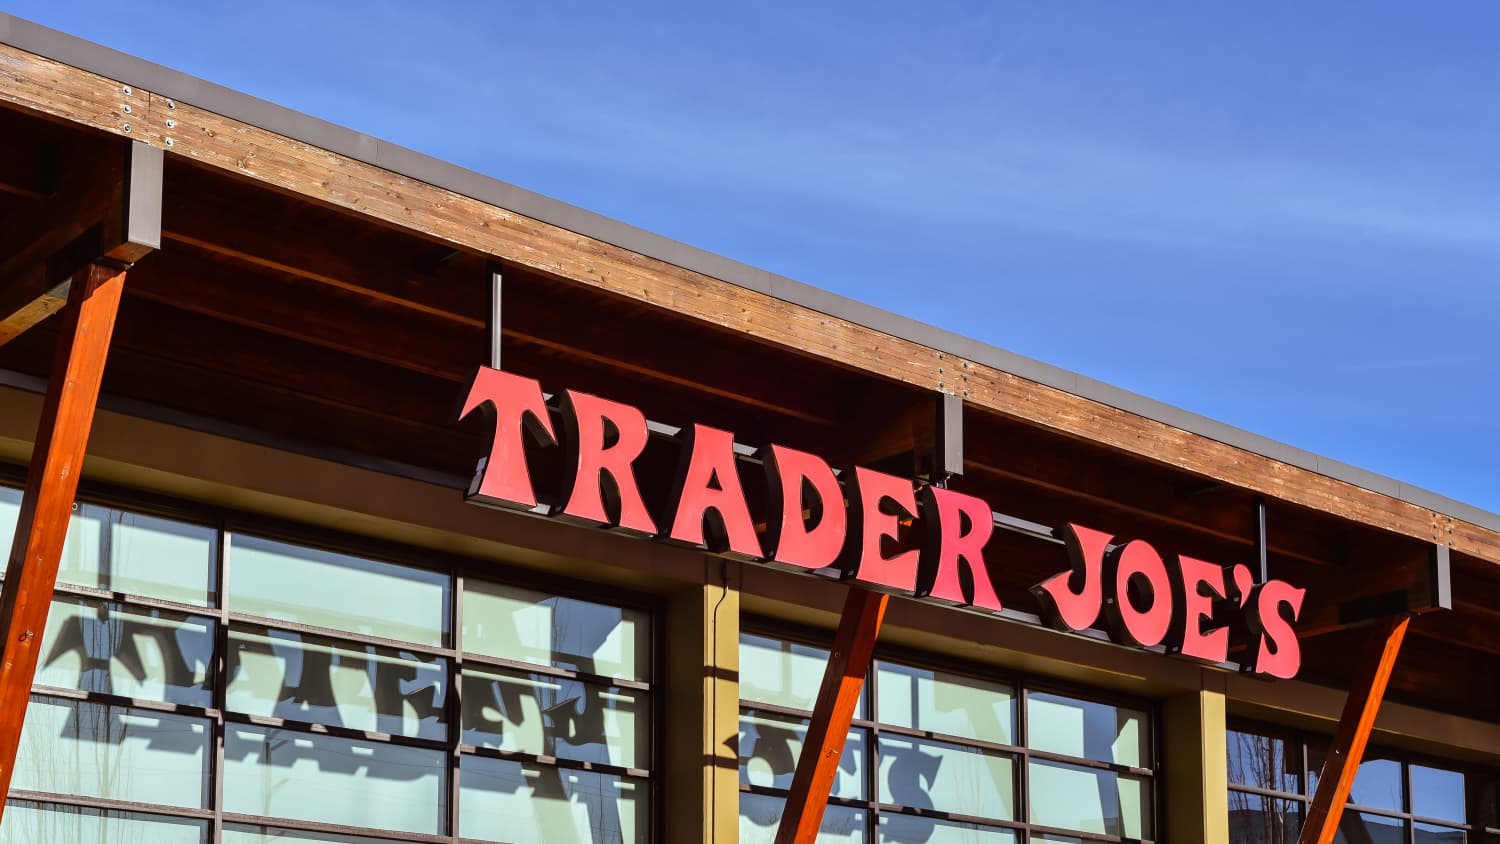 Trader Joe’s Newest Groceries Are Their Most Inventive Yet